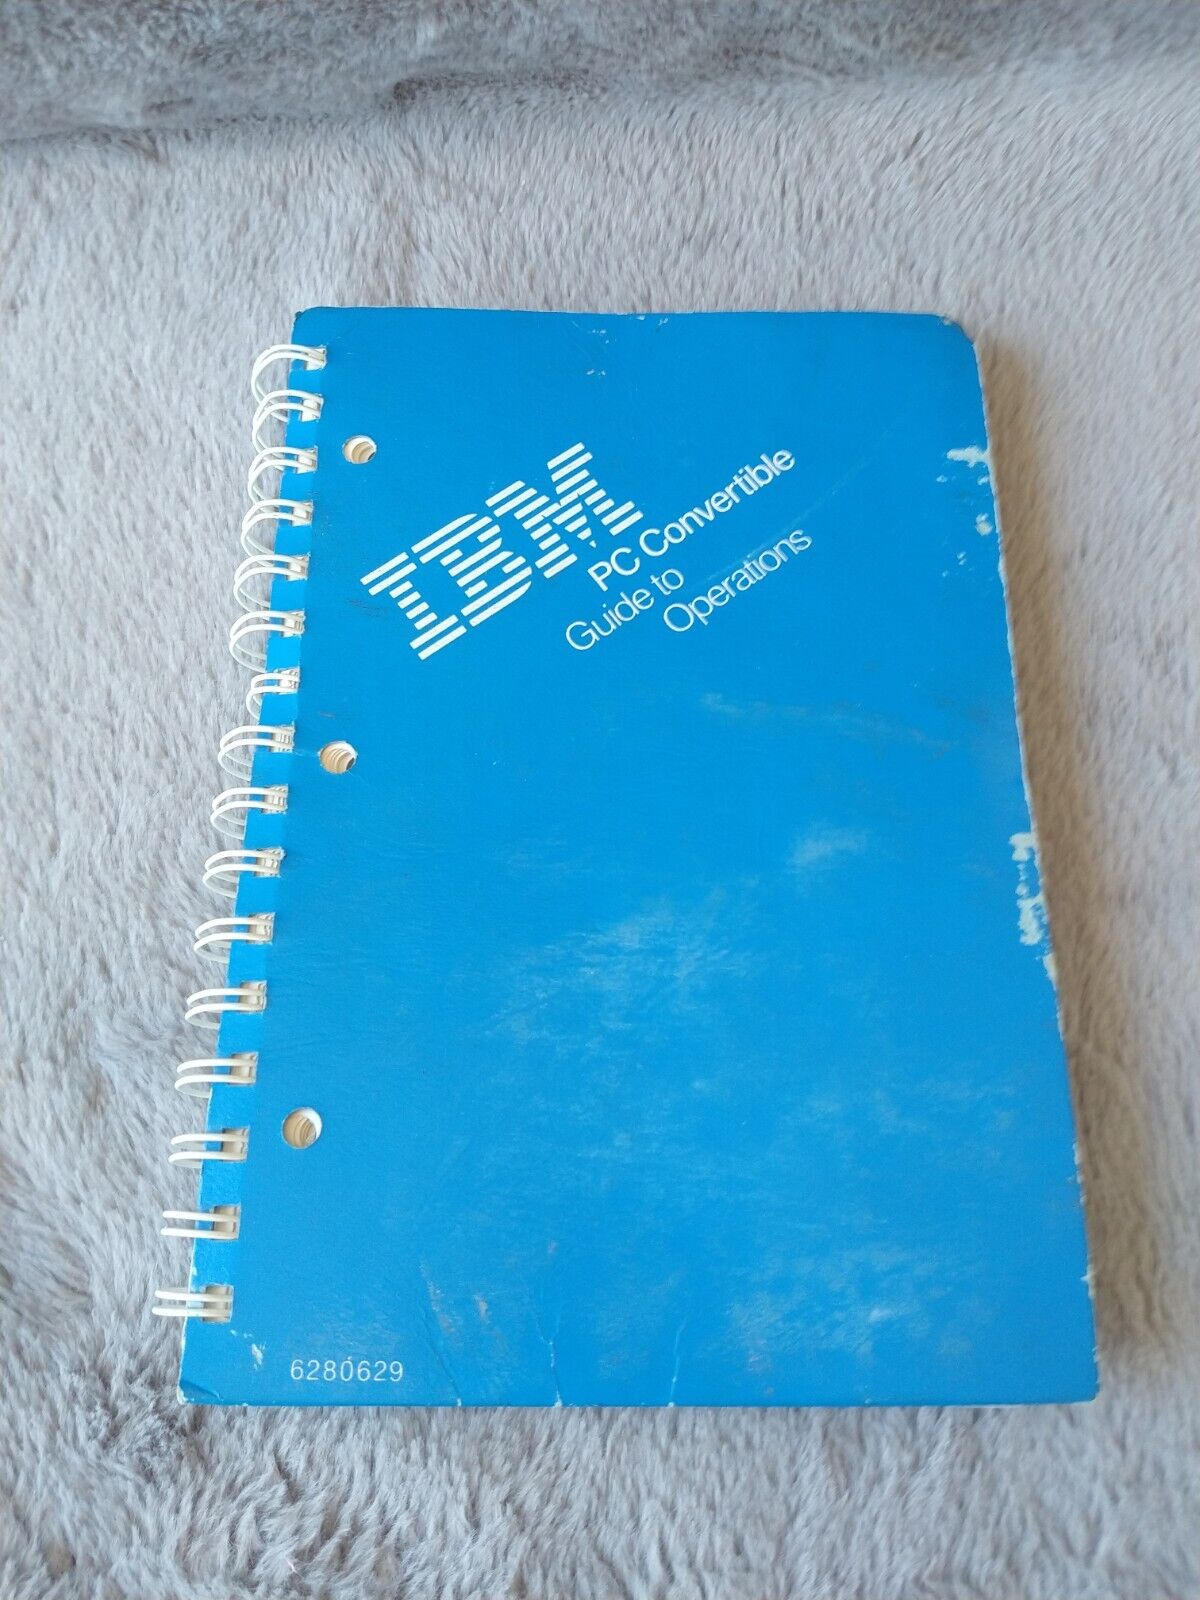 IBM 5140 PC Convertible Guide To Operations User Manual + Start-Up Floppy Disk